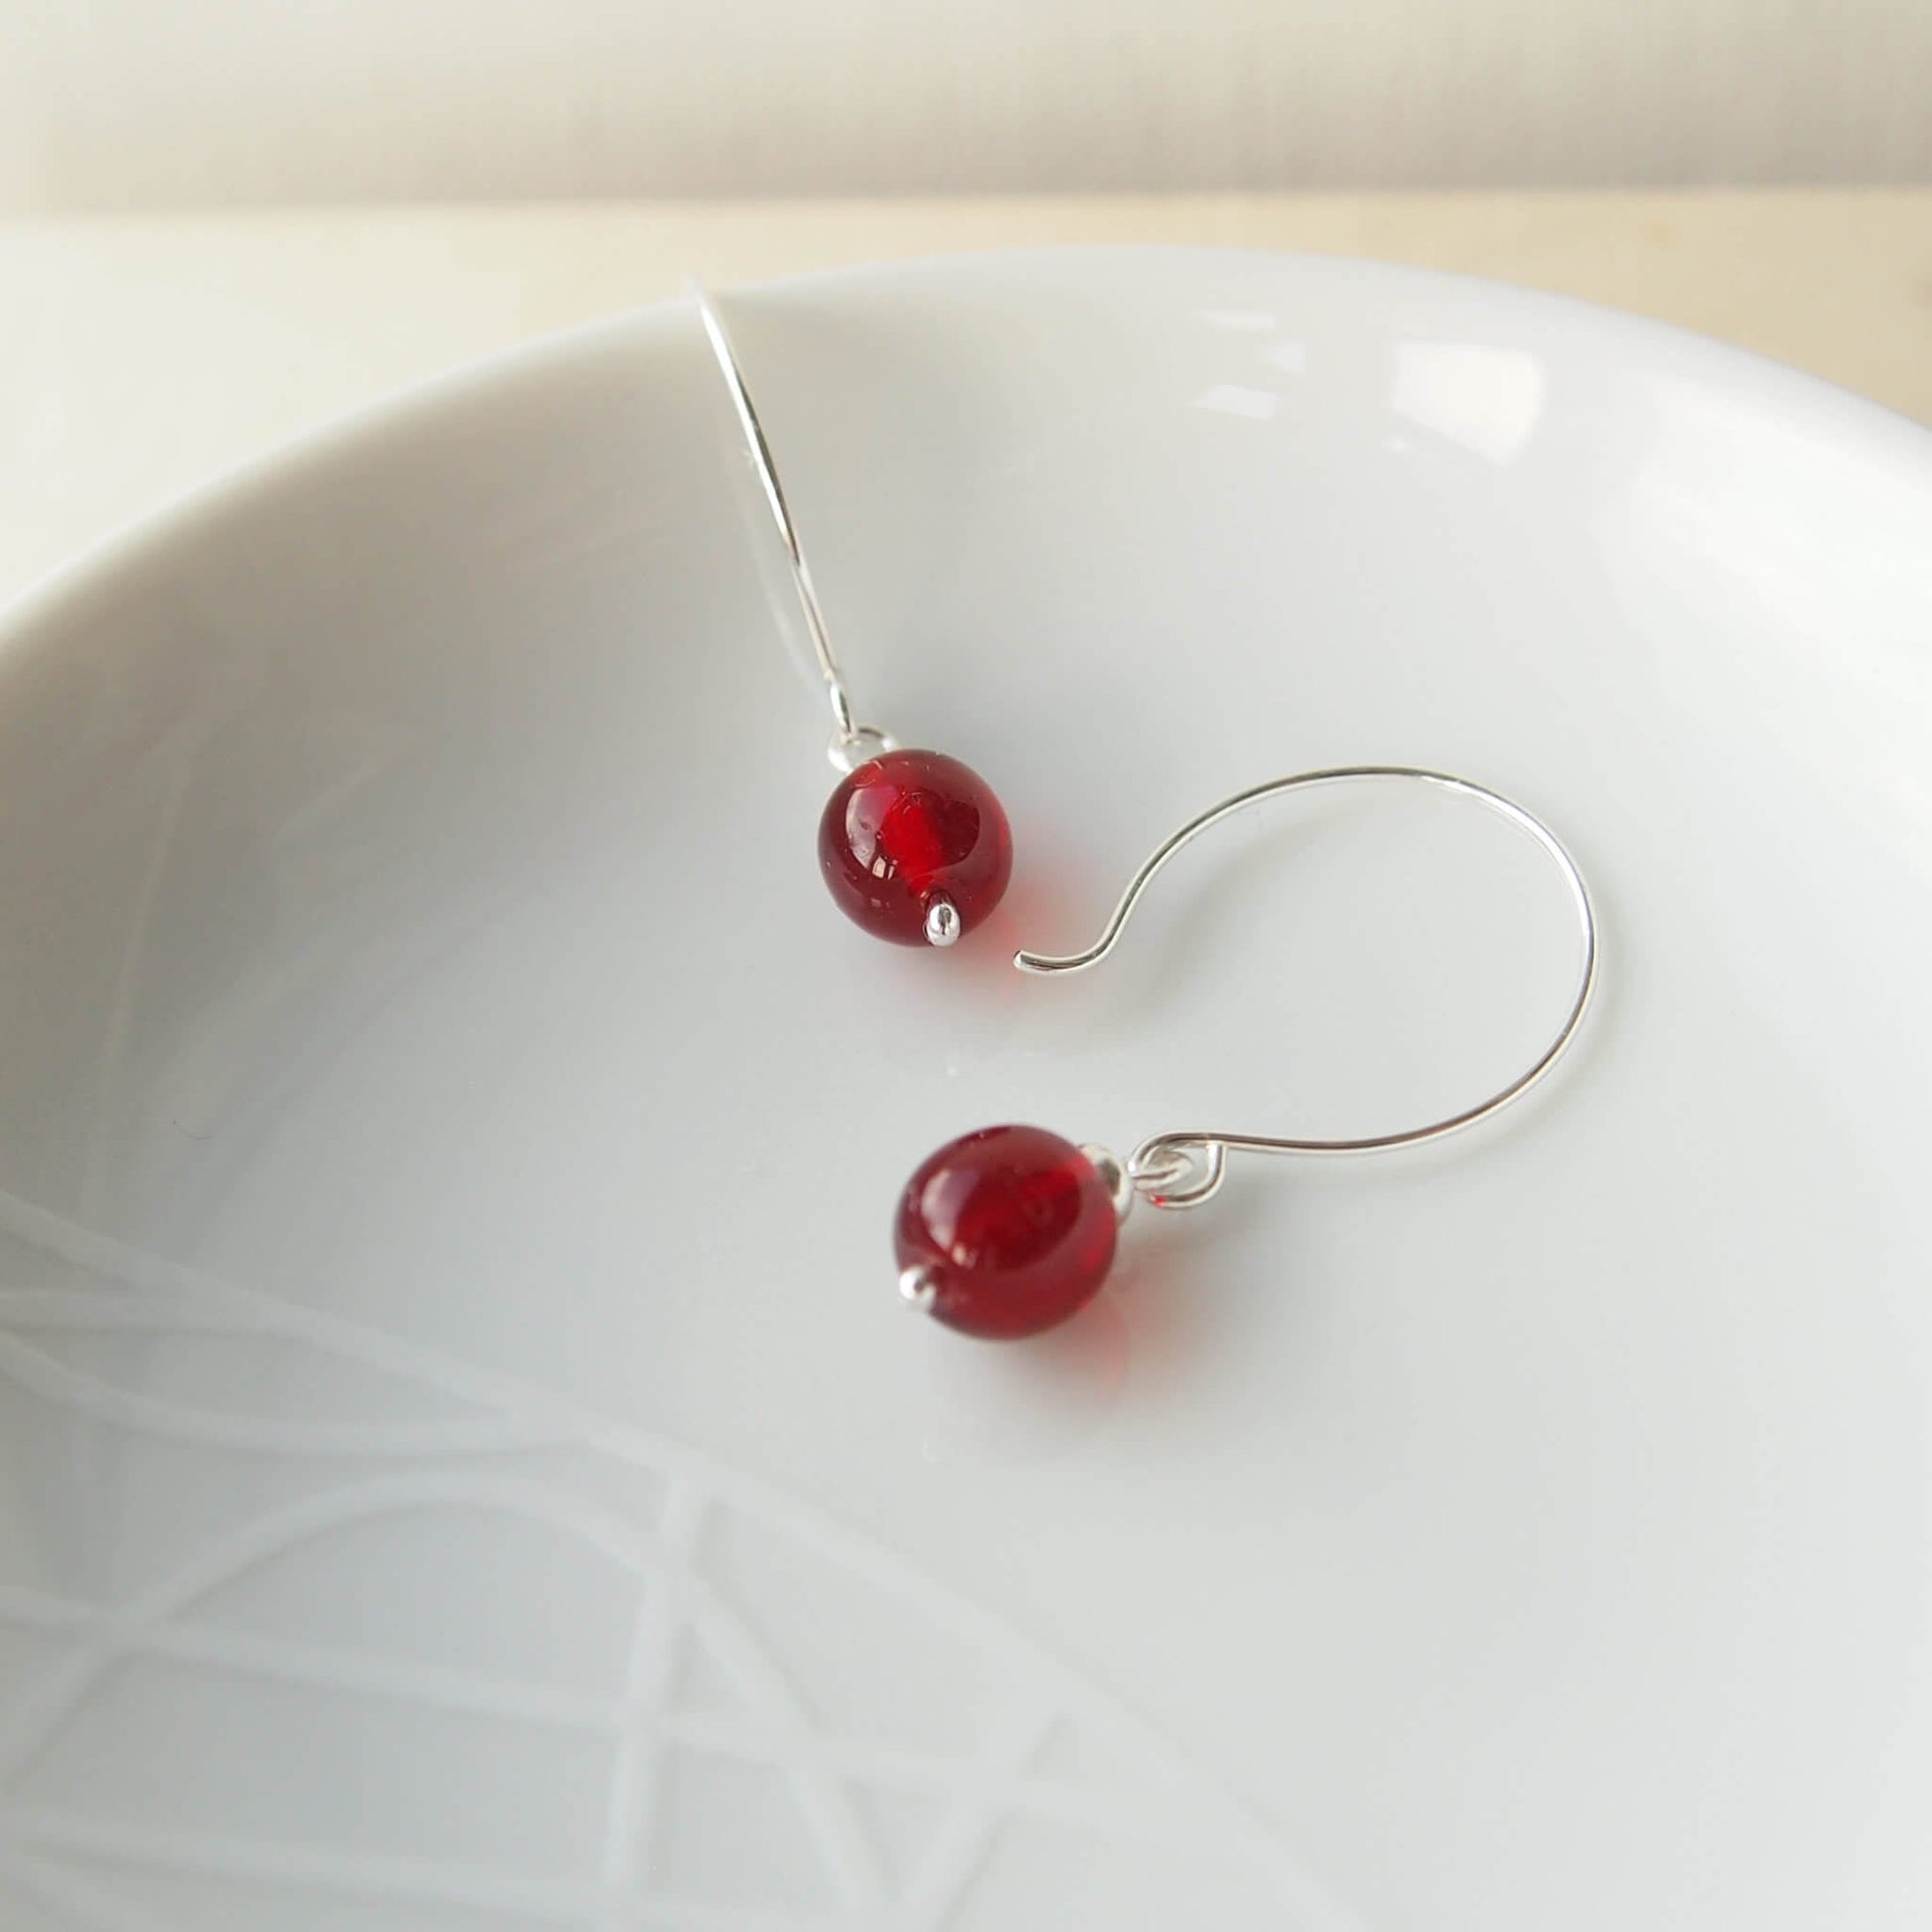 Red Silver minimalist handmade silver hoops. Handcrafted ear wires with a round glass bead dropper. Made in Scotland by maram jewellery